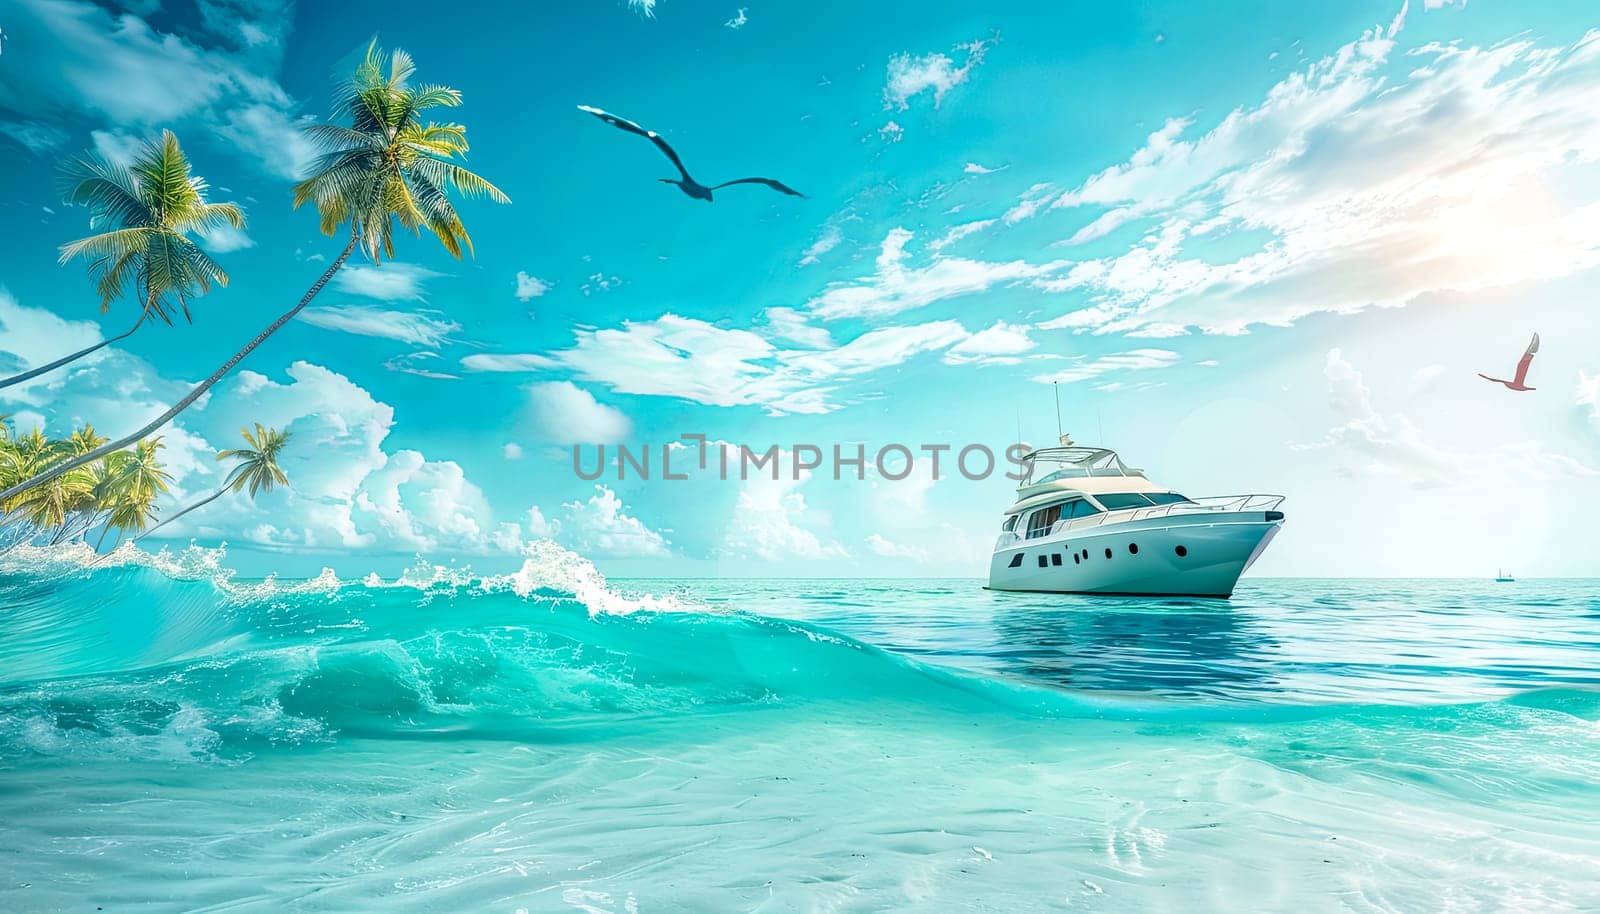 Serene tropical seascape with a luxury yacht amongst palm trees and flying birds